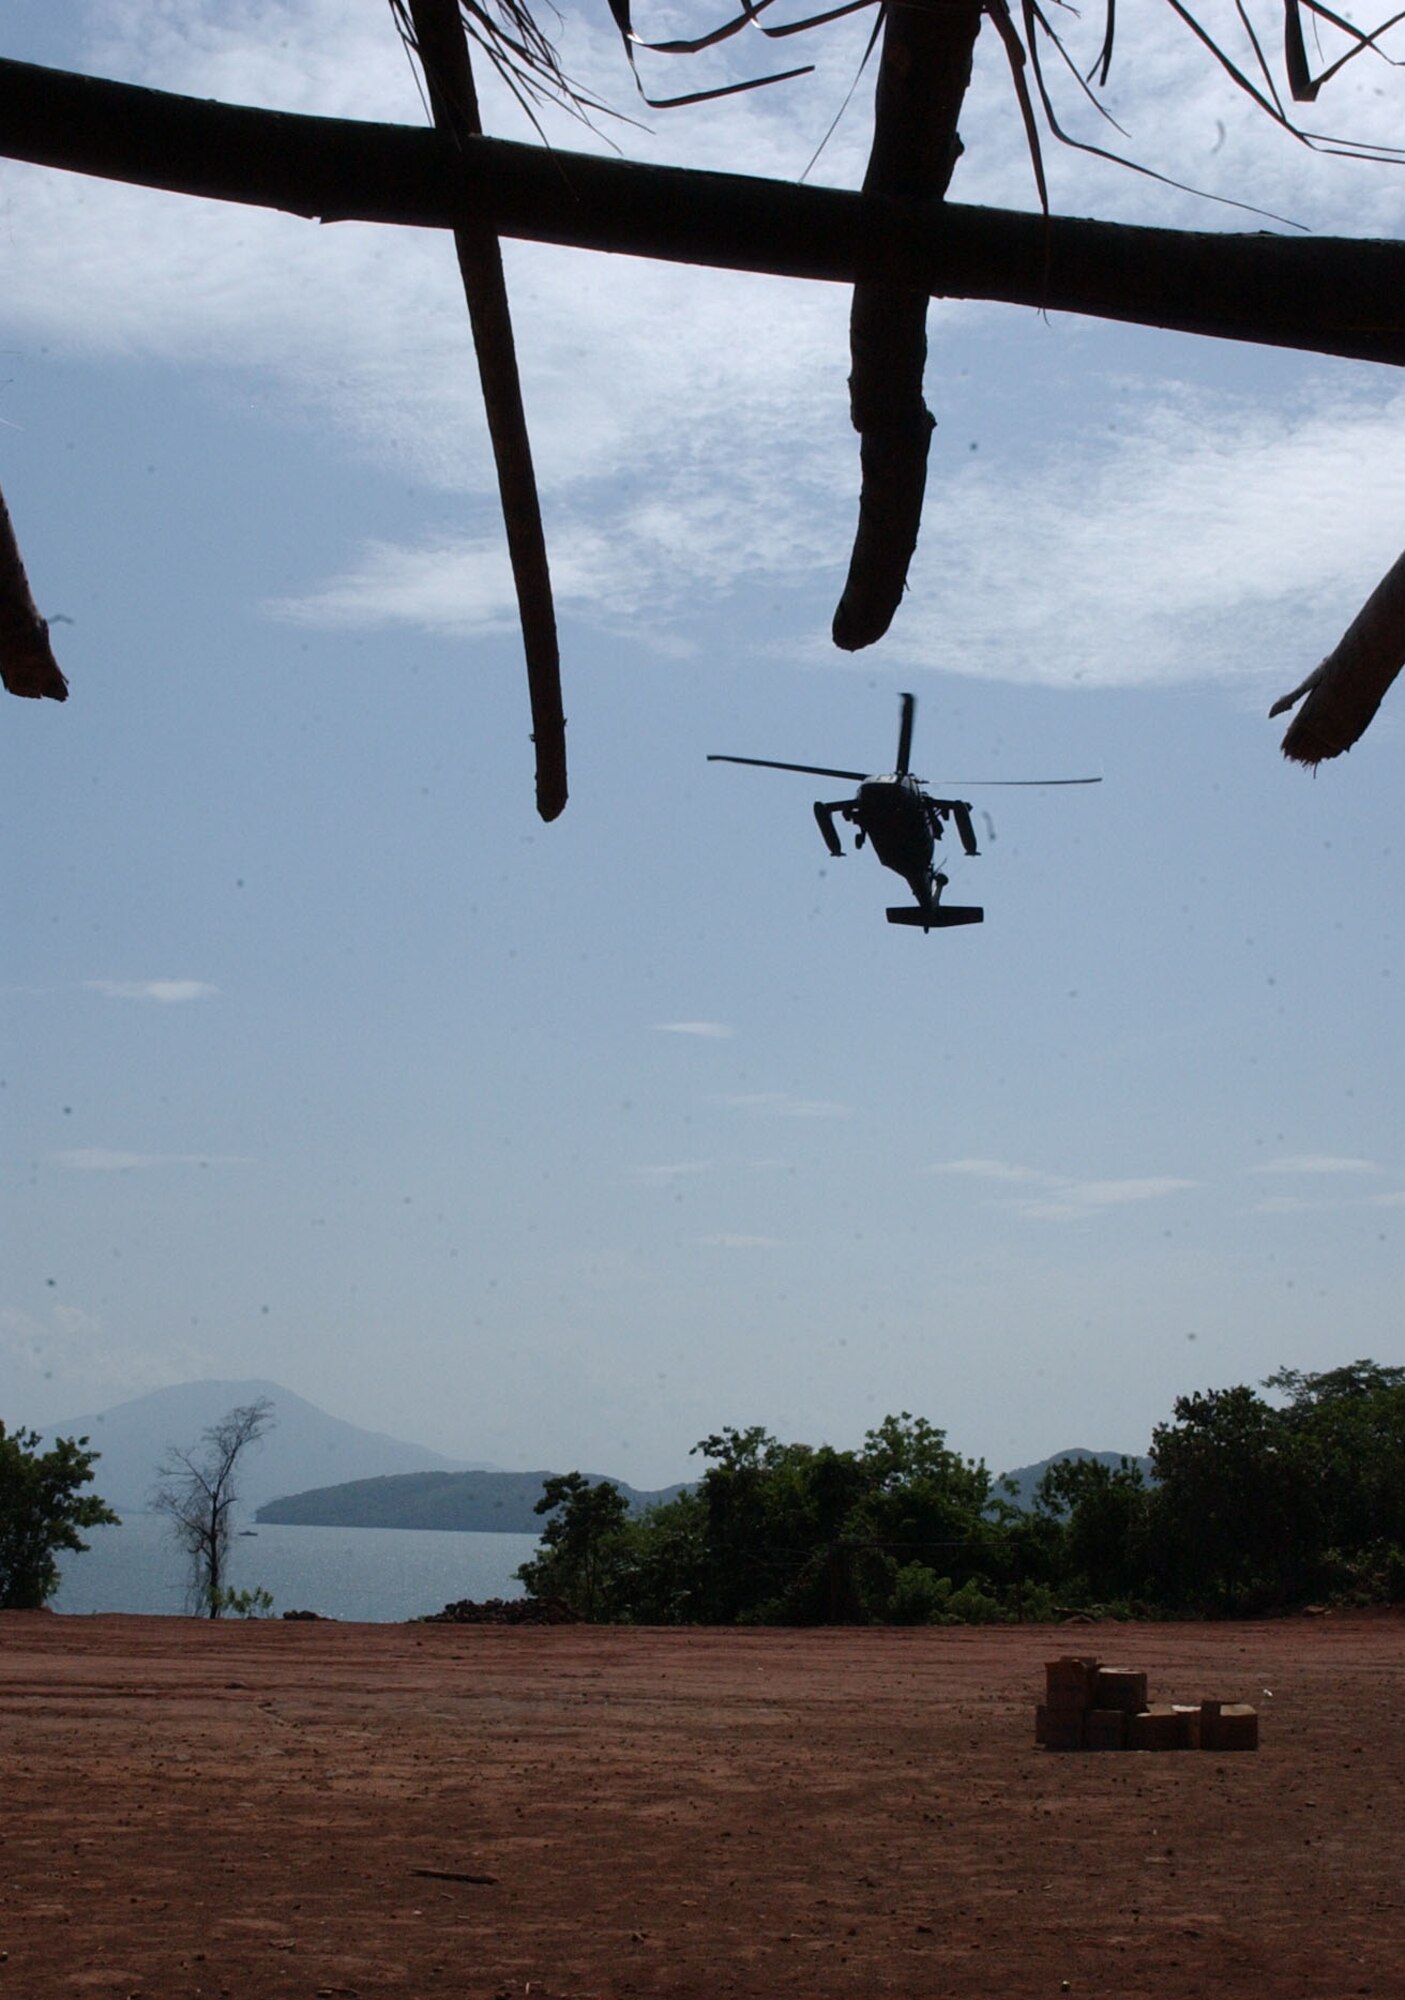 A UH-60 Black Hawk from the 1st Battalion, 228th Aviation Regiment prepares to land in a soccer field in Coyolito, Honduras to pick up humanitarian supplies for Project Handclasp. Project Handclasp is a partnership between the Navy and corporations, public service organizations, non-government organizations and individuals throughout the United States to provide humanitarian assistance overseas. Members of Joint Task Force-Bravo, at Soto Cano Air Base, provided air, ground and logistical support for the mission. Air Force photo by Senior Airman Shaun Emery.                                                            